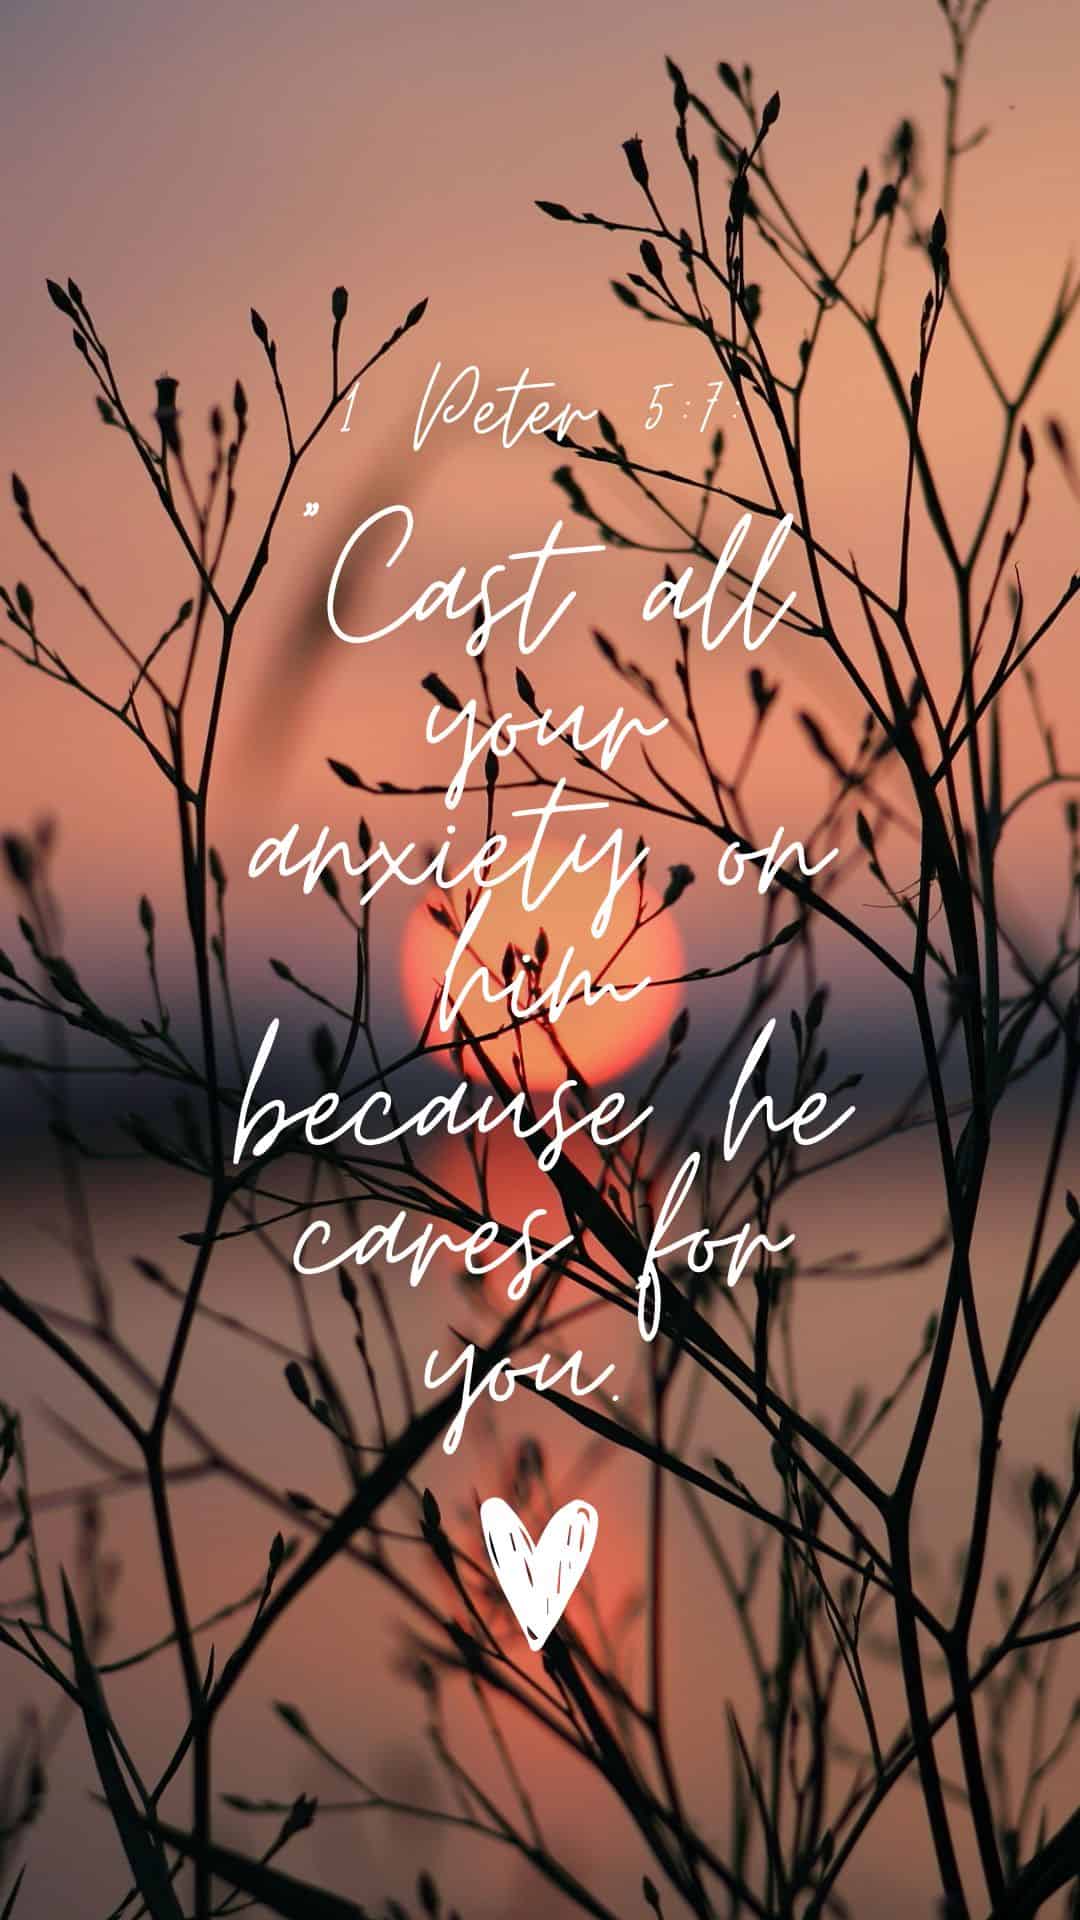 1 Peter 5:7: "Cast all your anxiety on him because he cares for you."